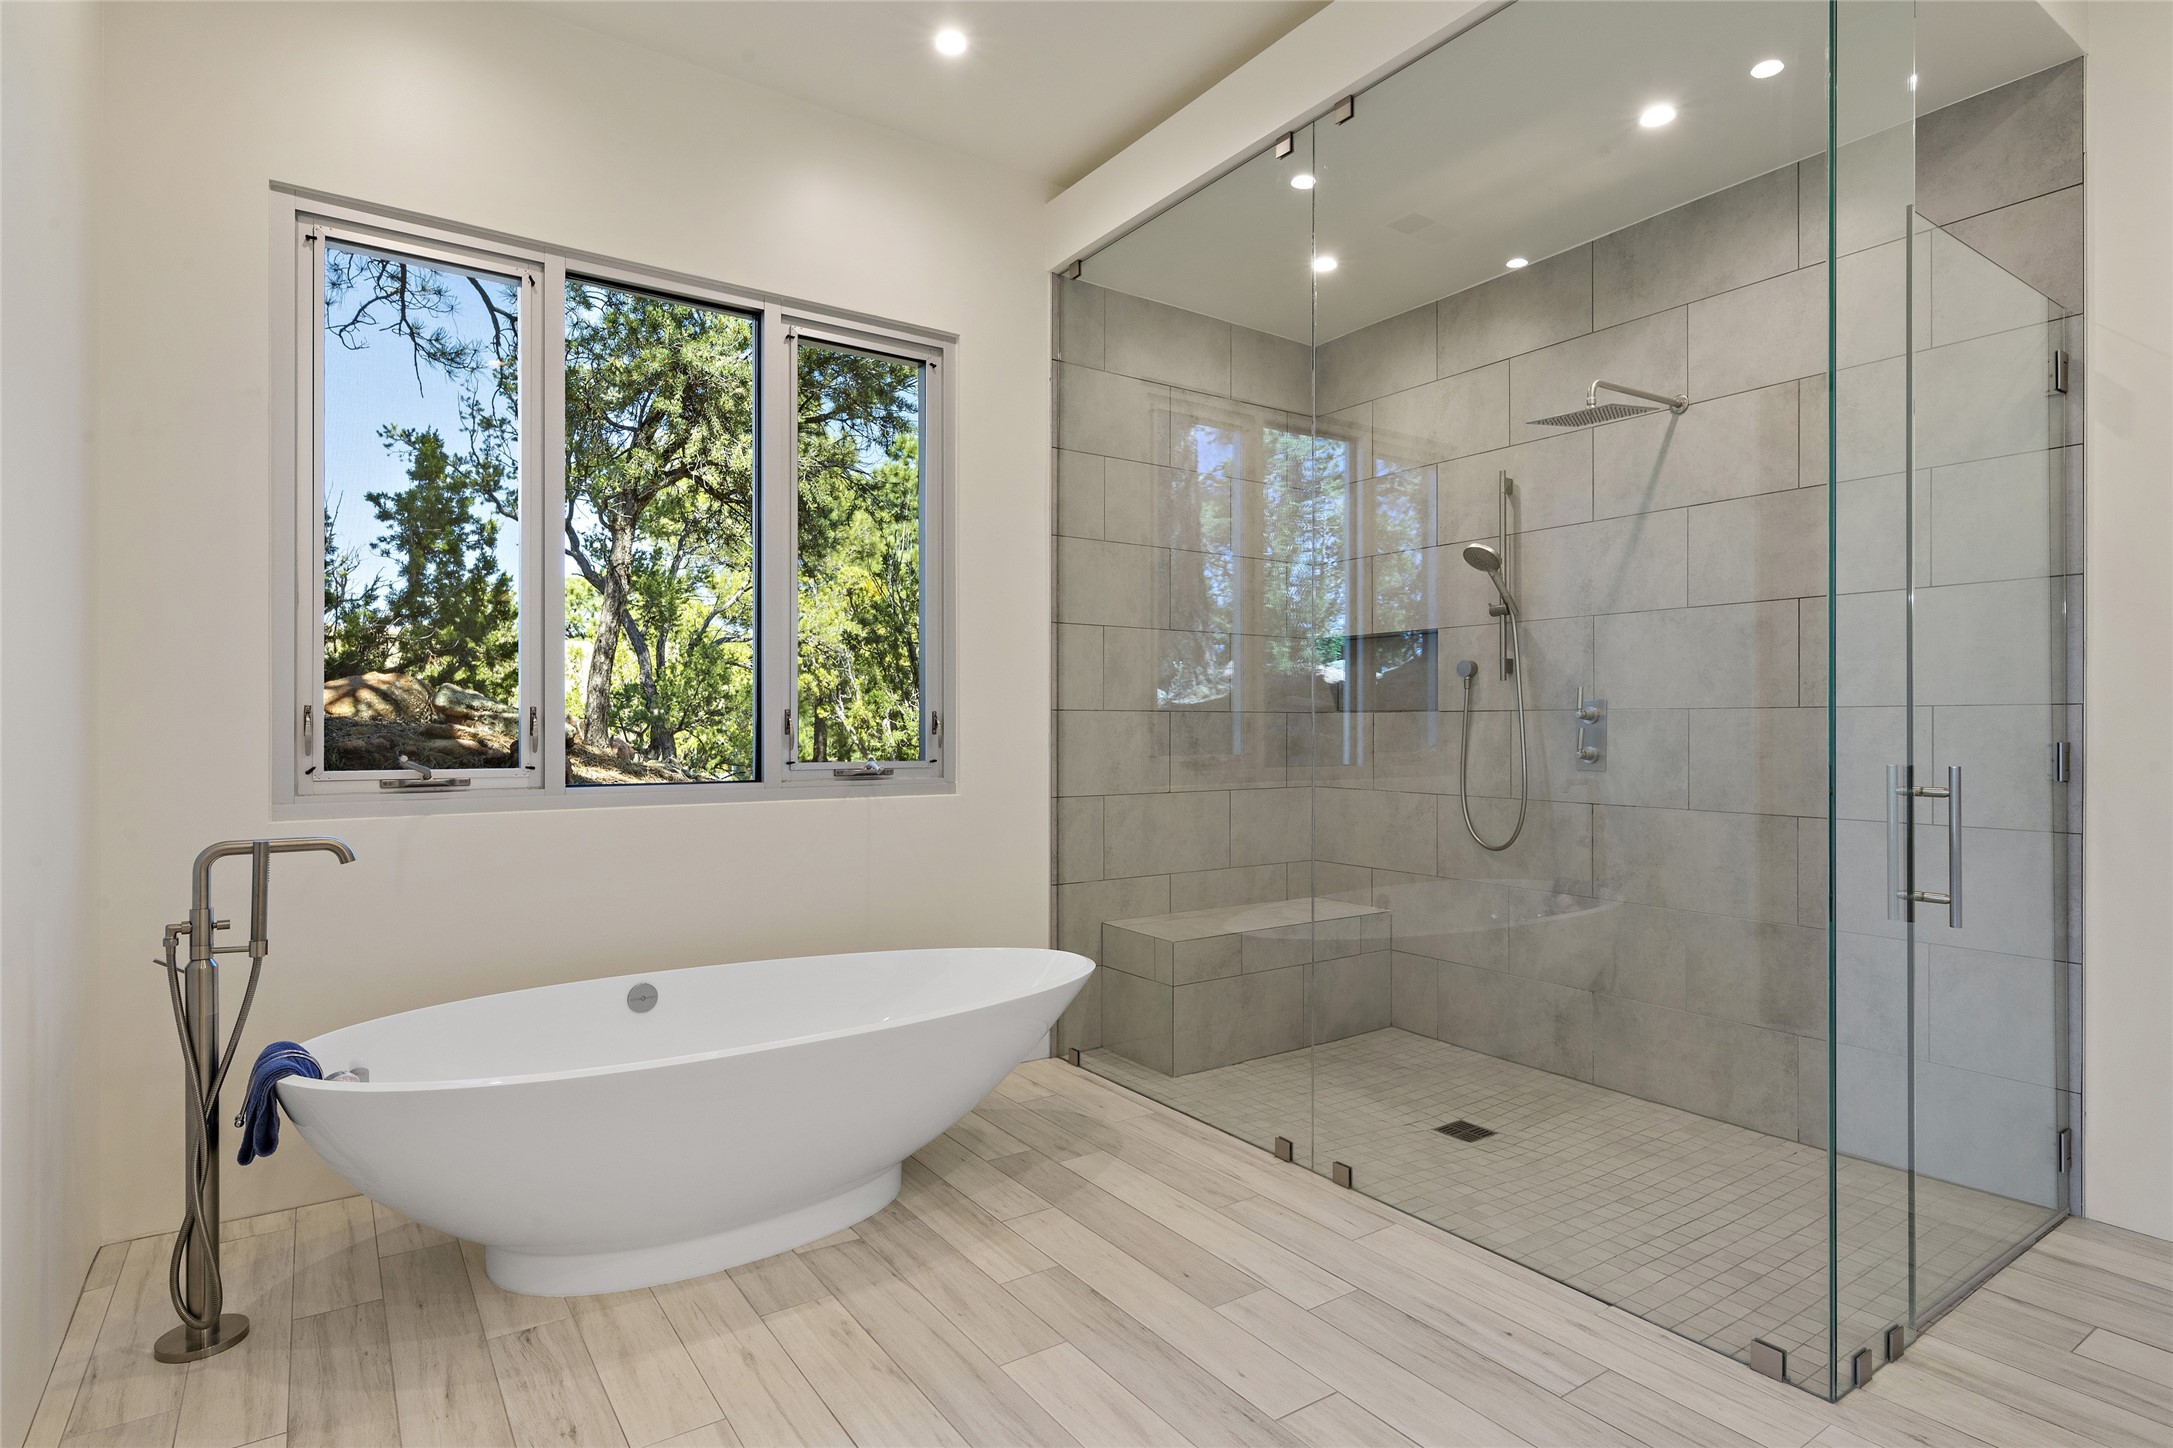 Primary Bathroom's Large Shower and Soaking Tub